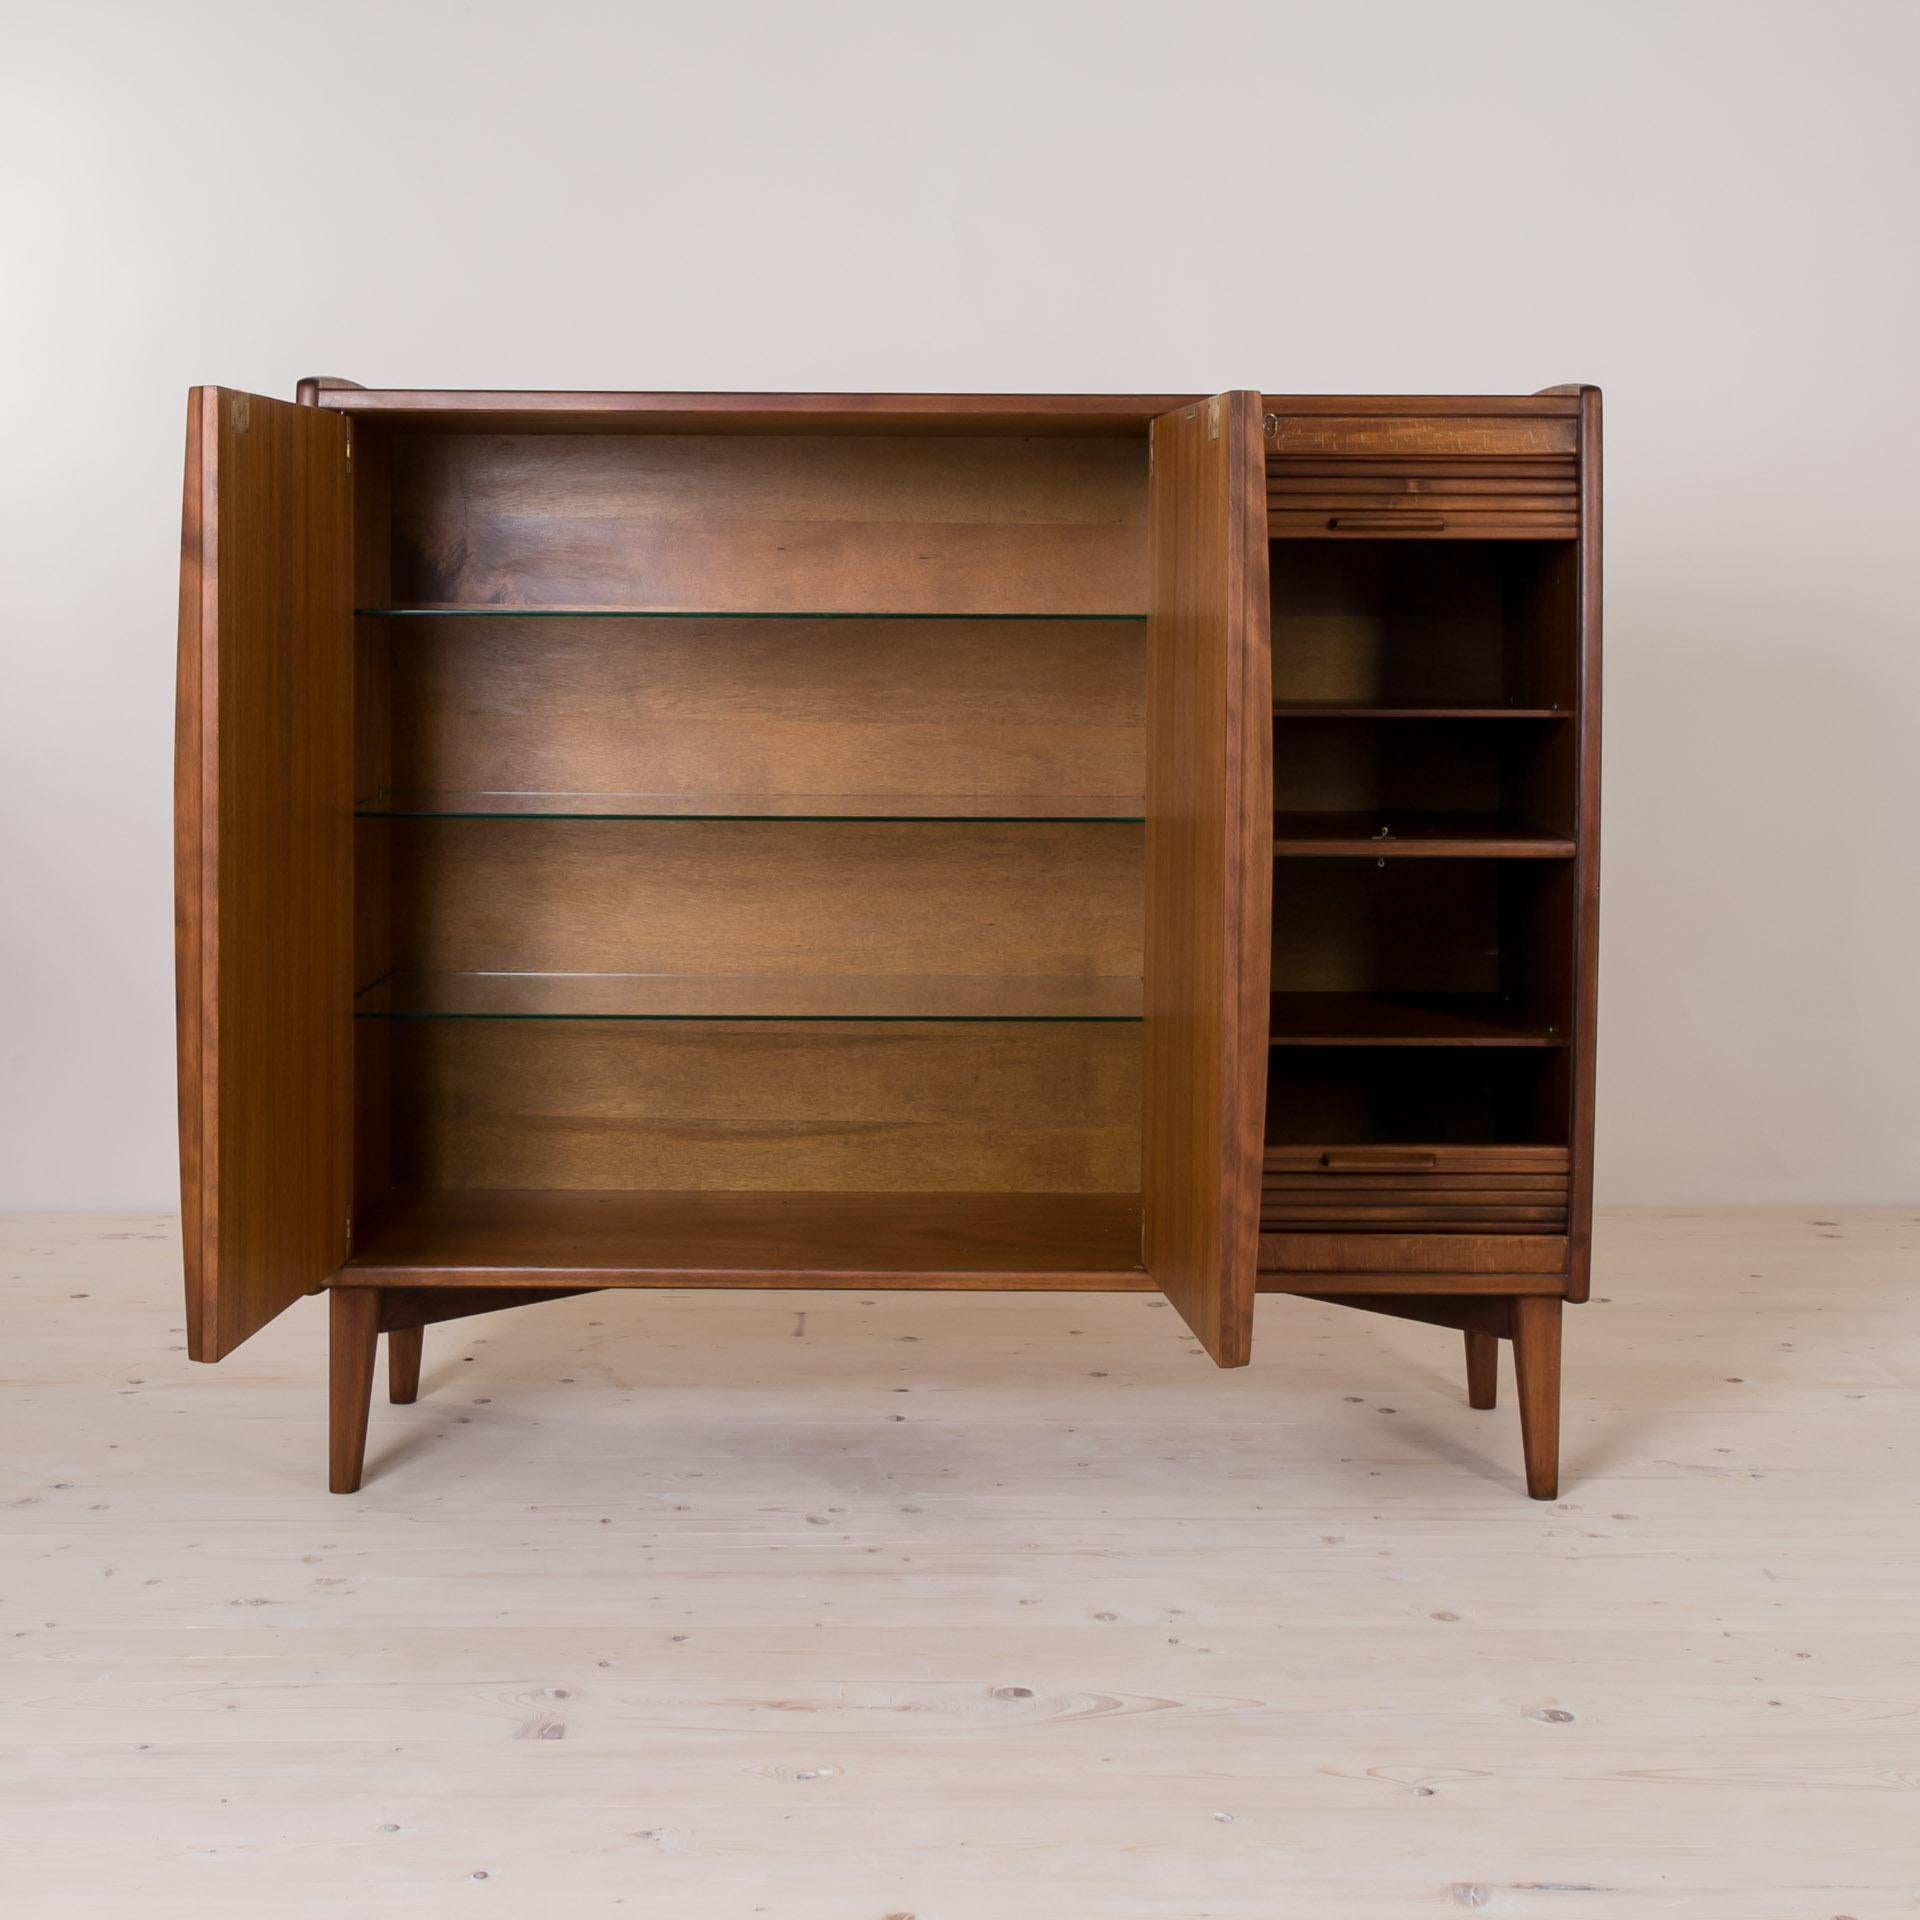 Mid-20th Century Teak Sideboard or Bar Cabinet by Alfred Sand for FLEKKEFJORD, Norway, 1960s